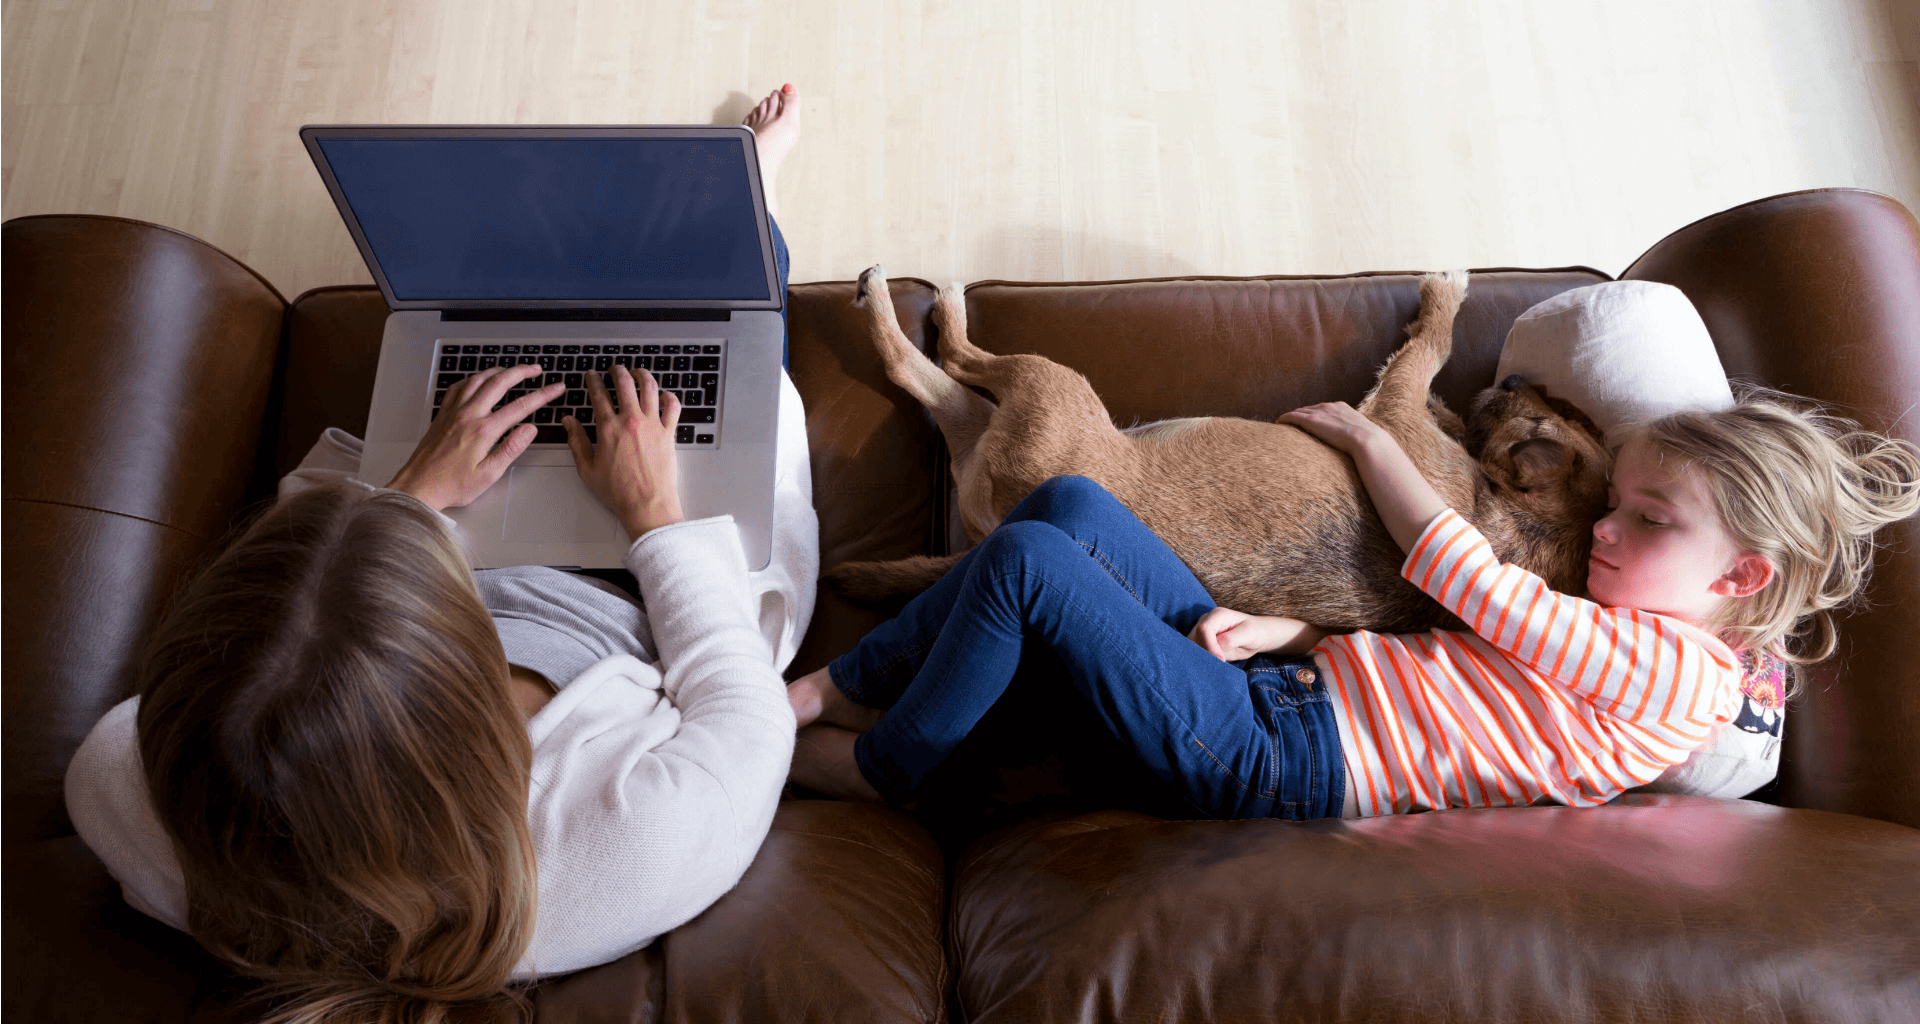 mother using apple laptop on couch while daughter cuddles with dog next to her